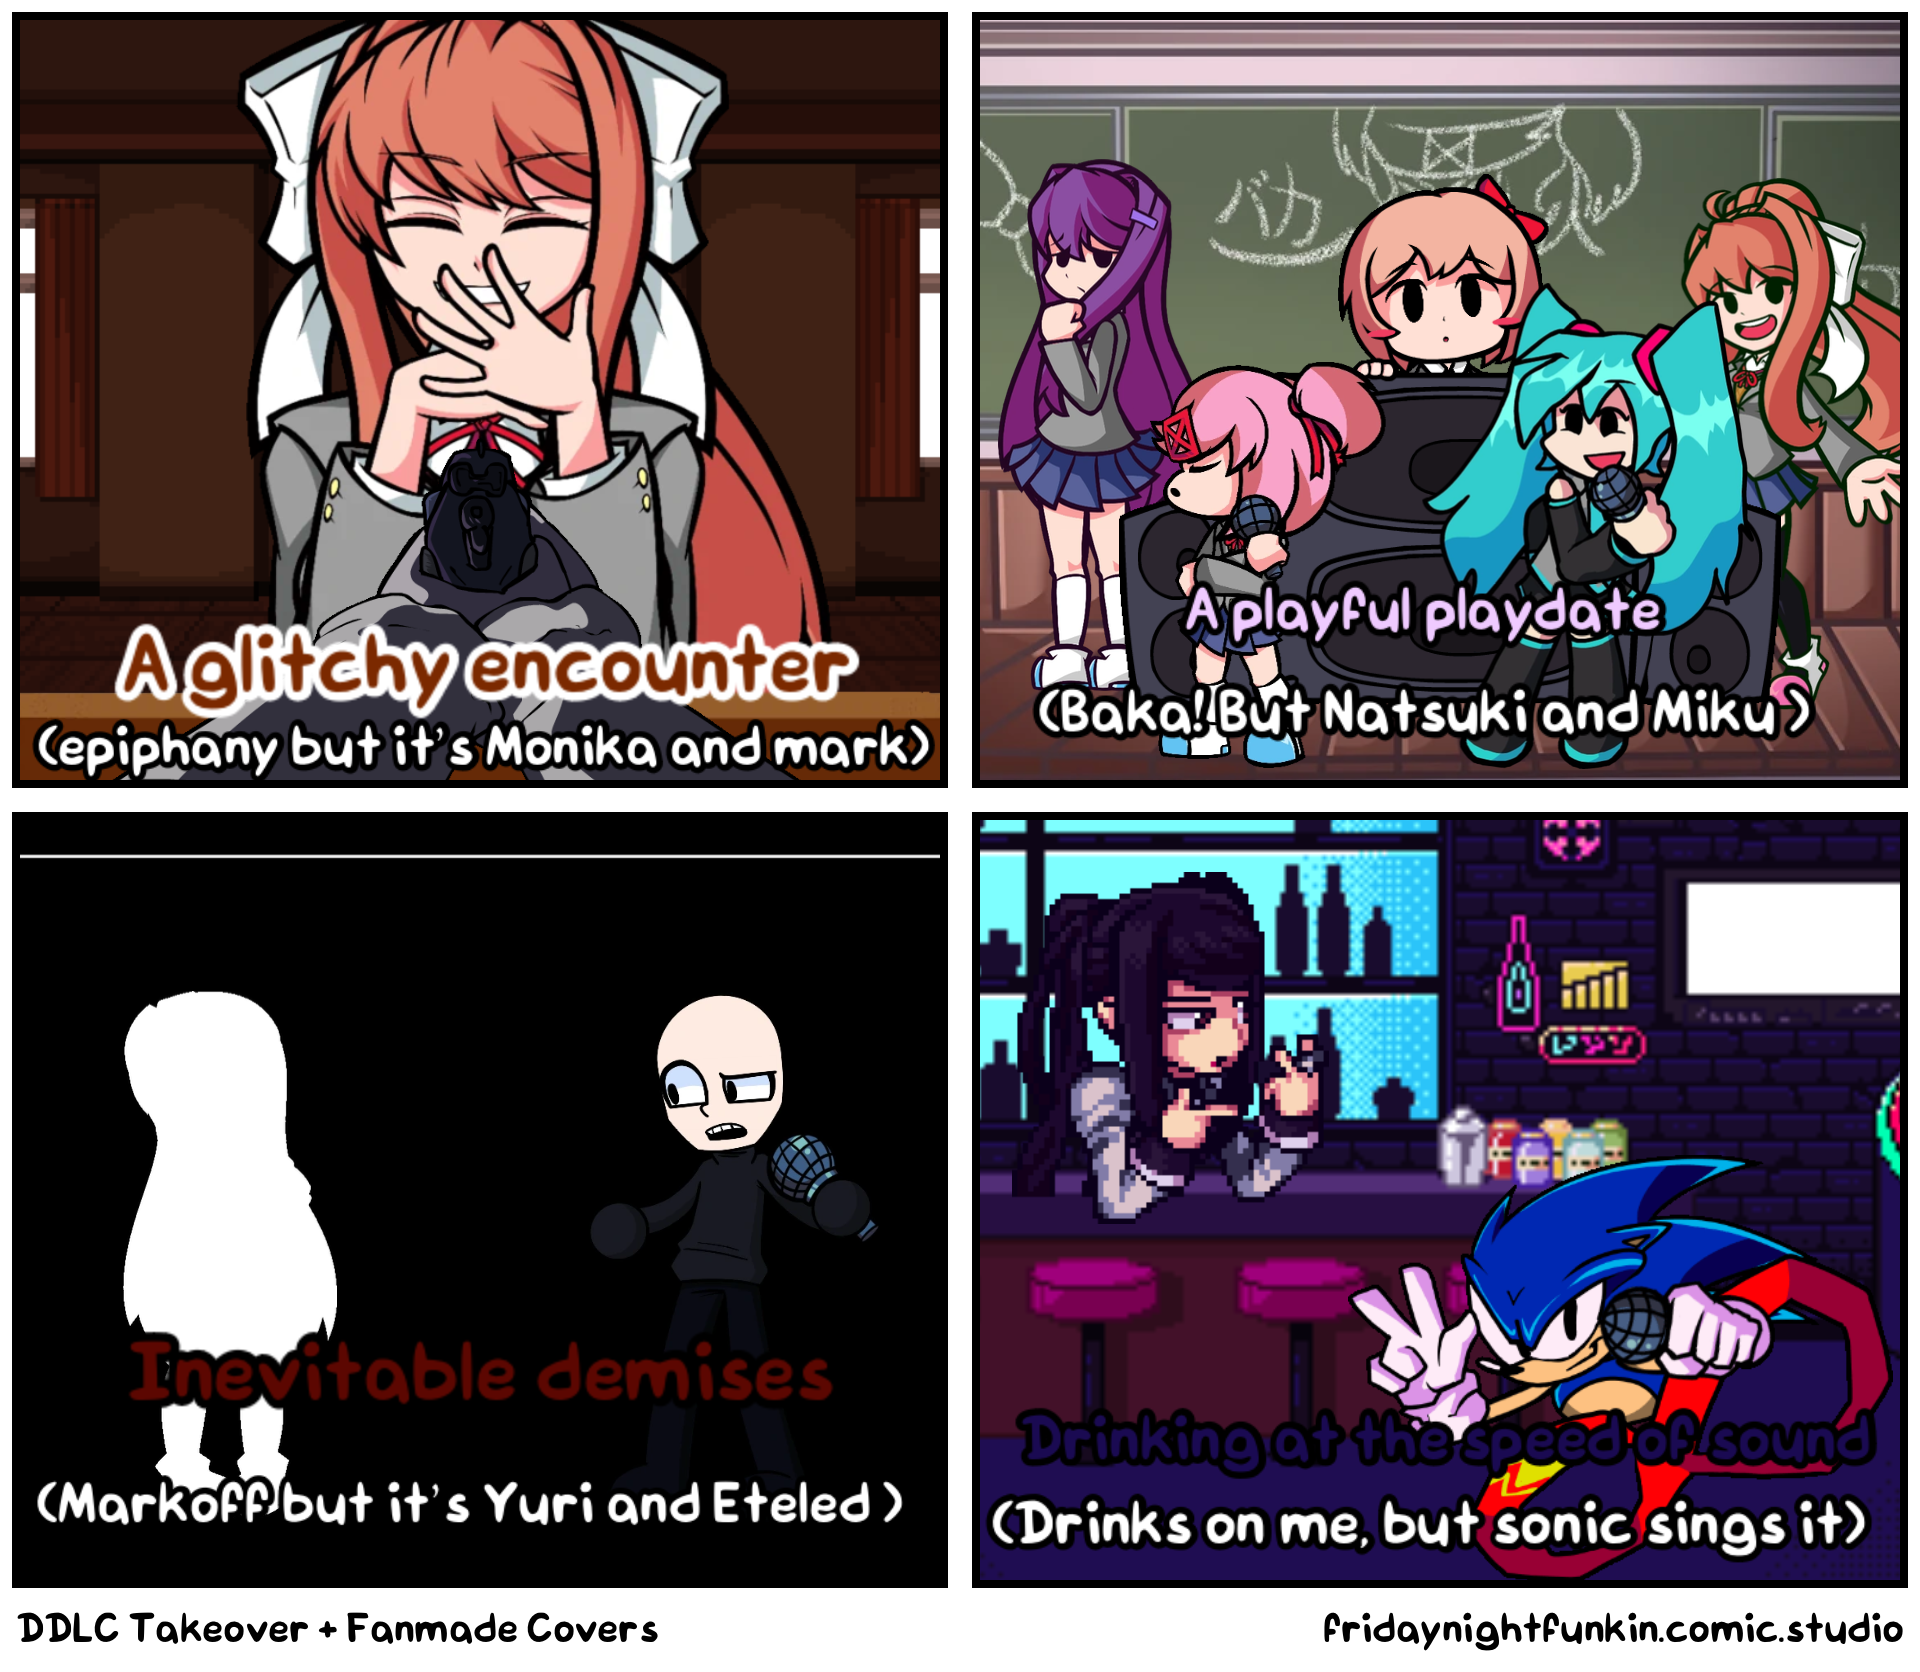 DDLC Takeover + Fanmade Covers